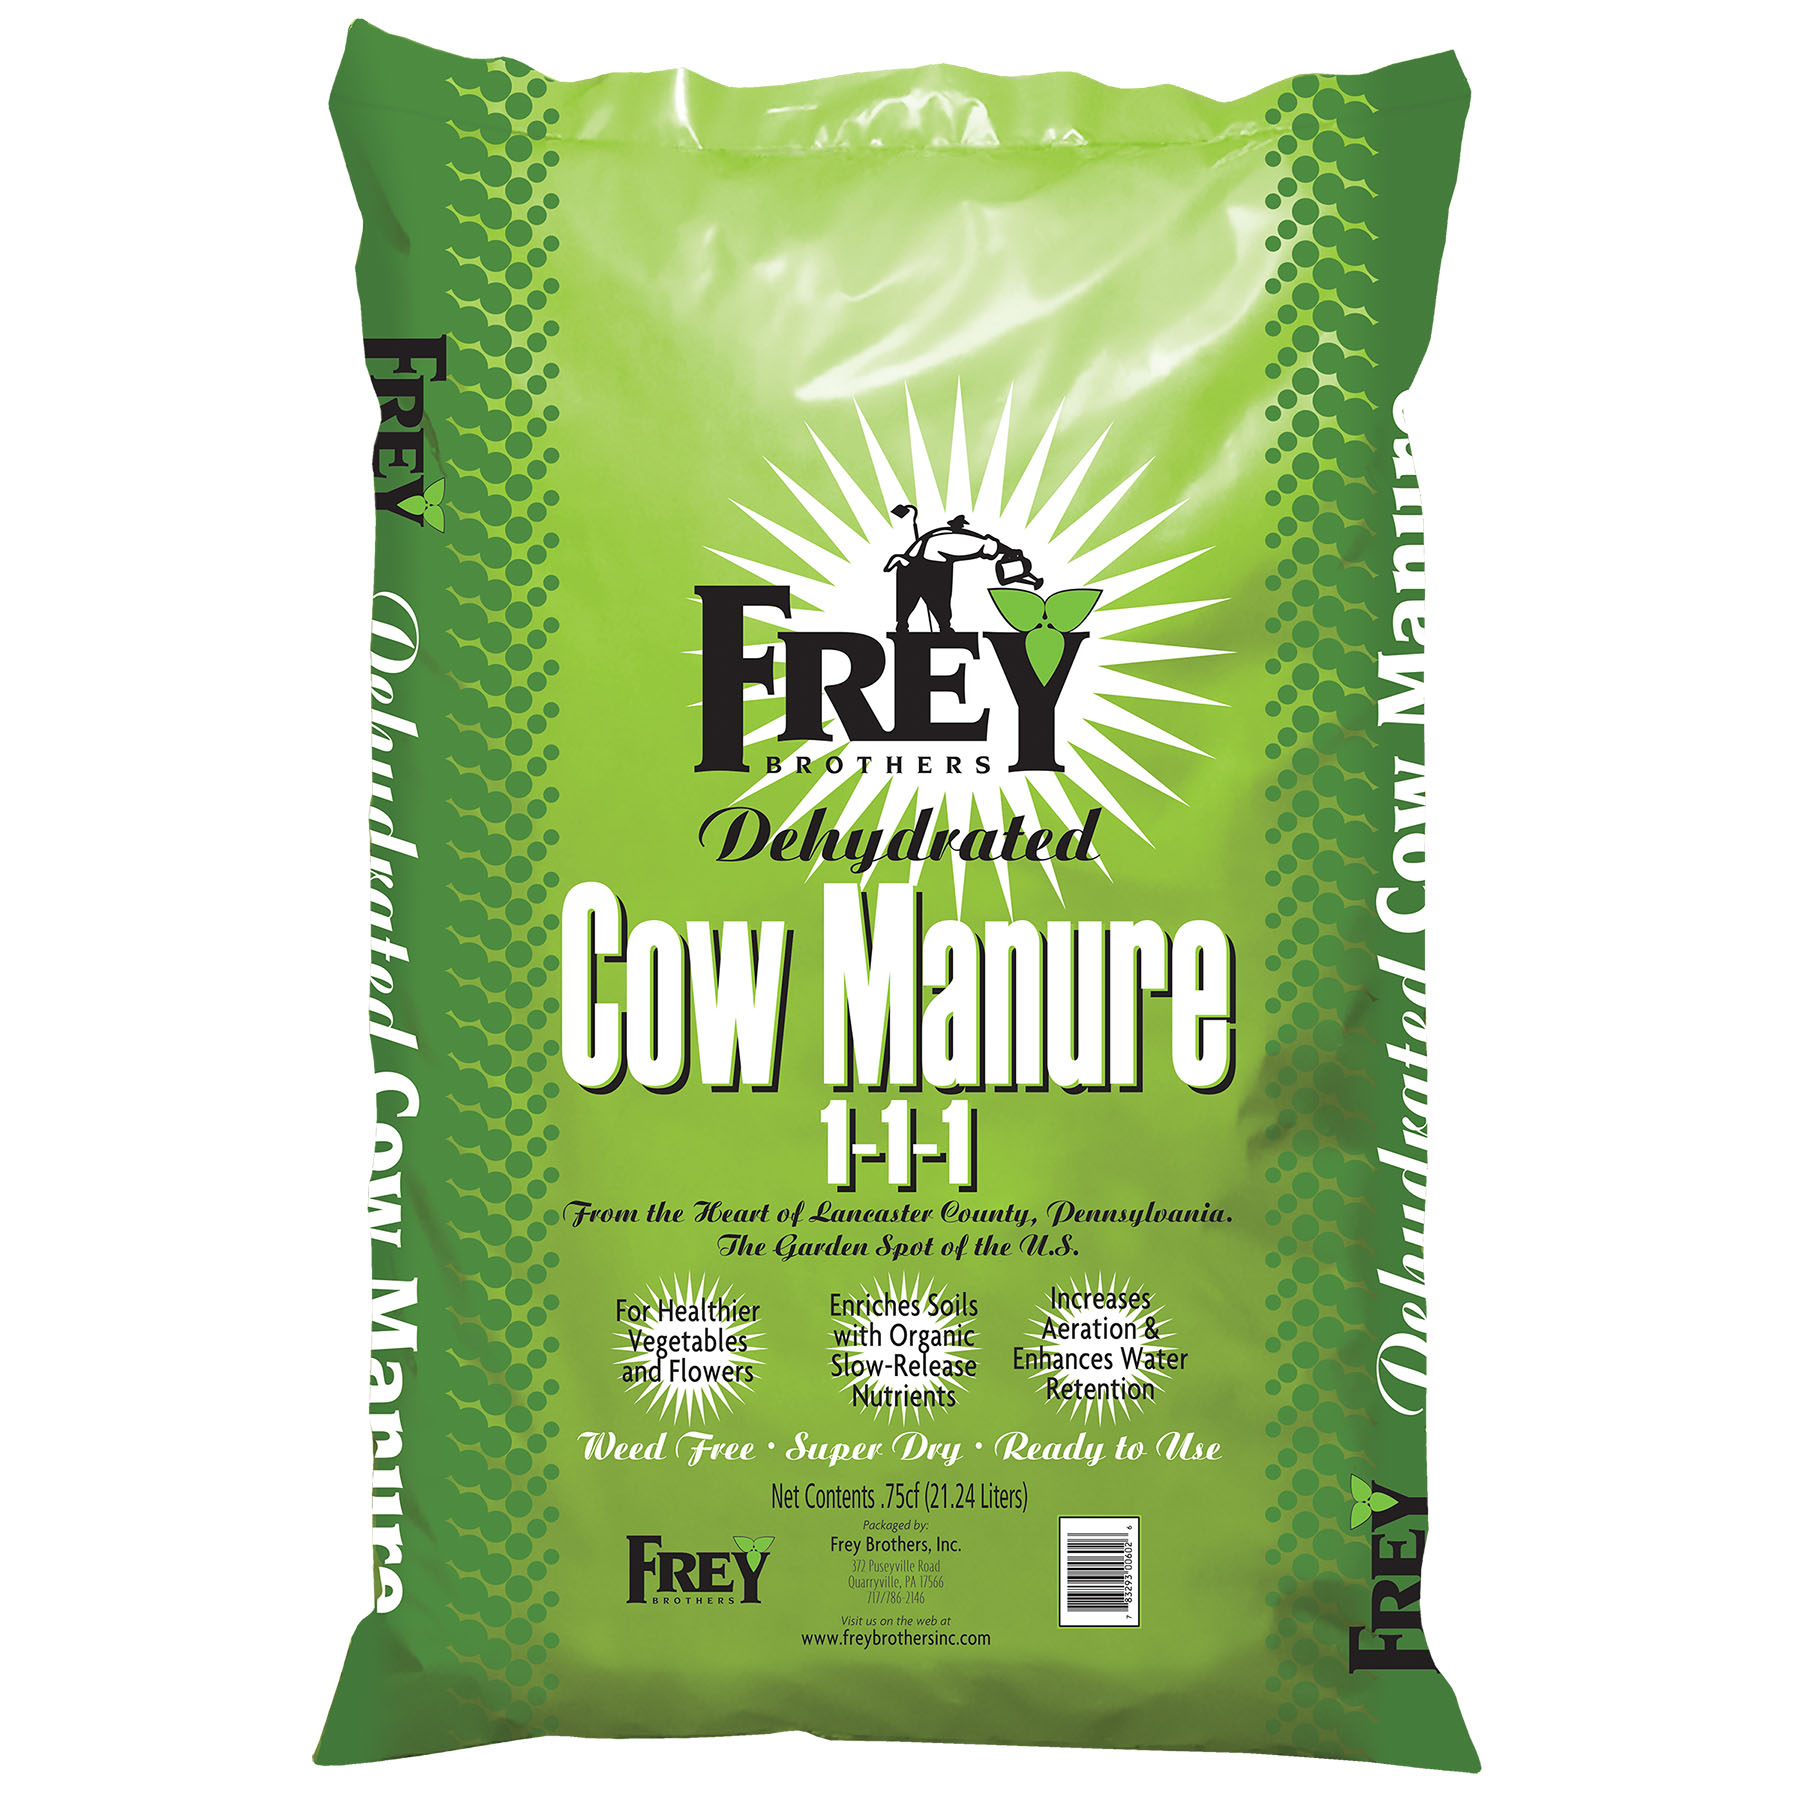 Frey Dehydrated Cow Manure 1-1-1 0.75 cu ft Bag - 75 per pallet